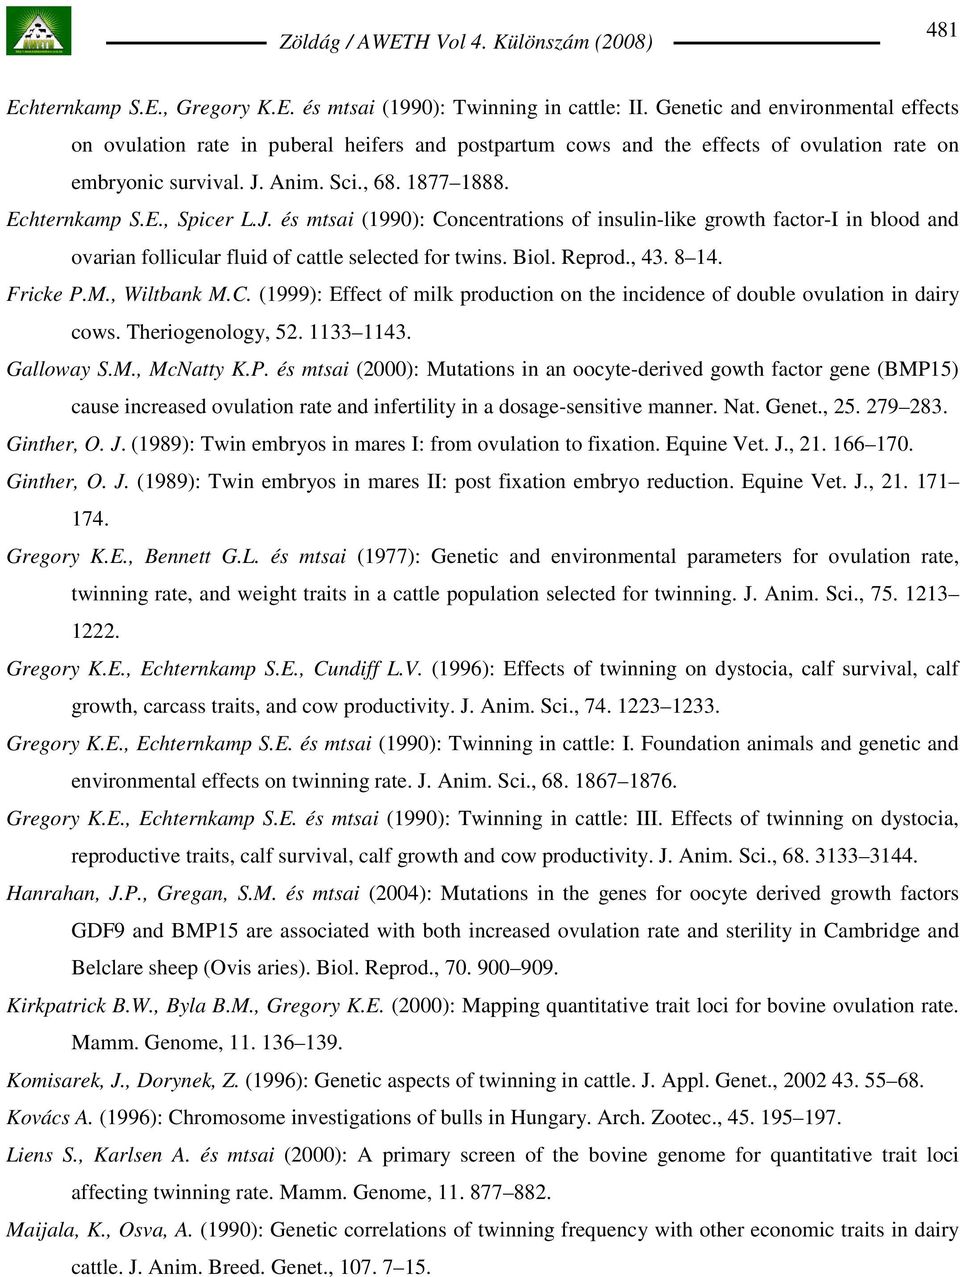 J. és mtsai (1990): Concentrations of insulin-like growth factor-i in blood and ovarian follicular fluid of cattle selected for twins. Biol. Reprod., 43. 8 14. Fricke P.M., Wiltbank M.C. (1999): Effect of milk production on the incidence of double ovulation in dairy cows.